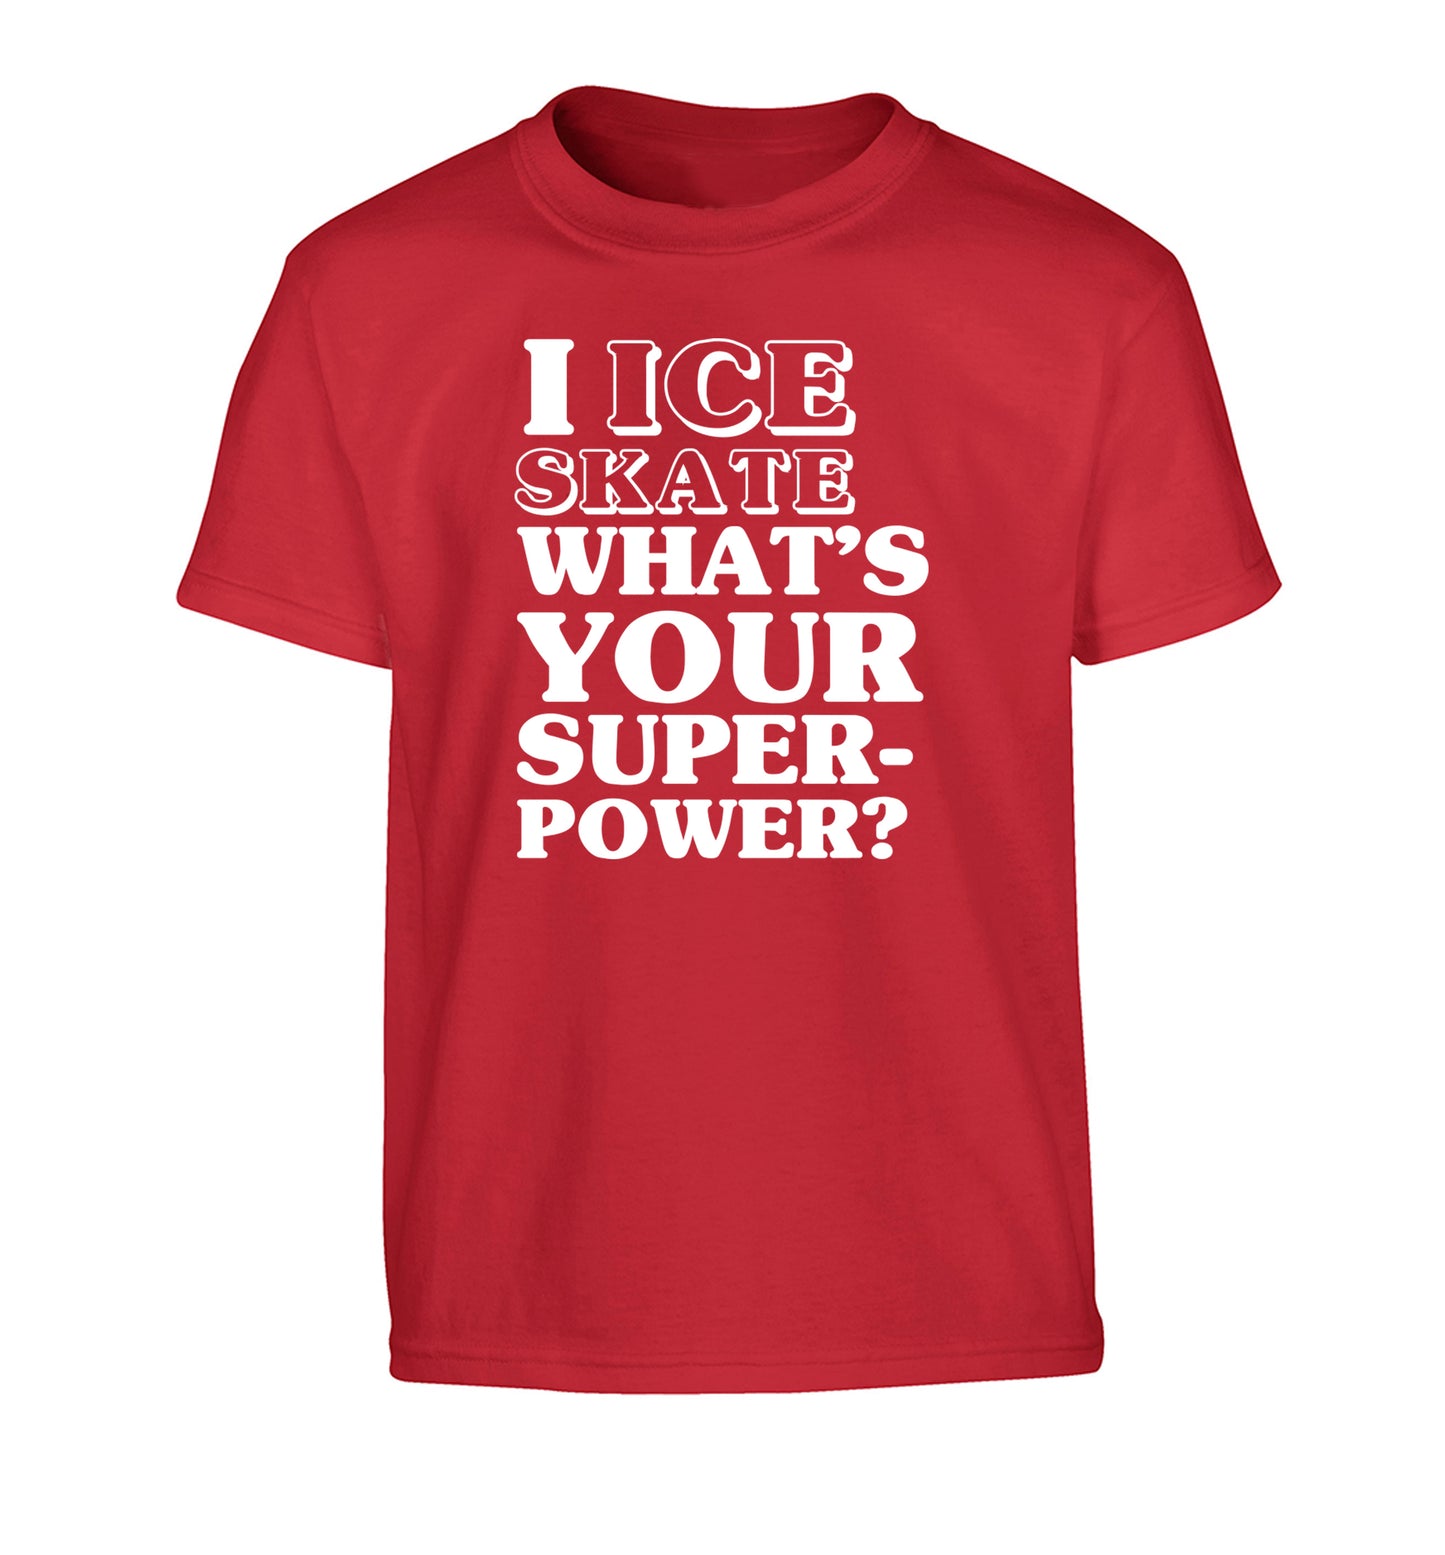 I ice skate what's your superpower? Children's red Tshirt 12-14 Years